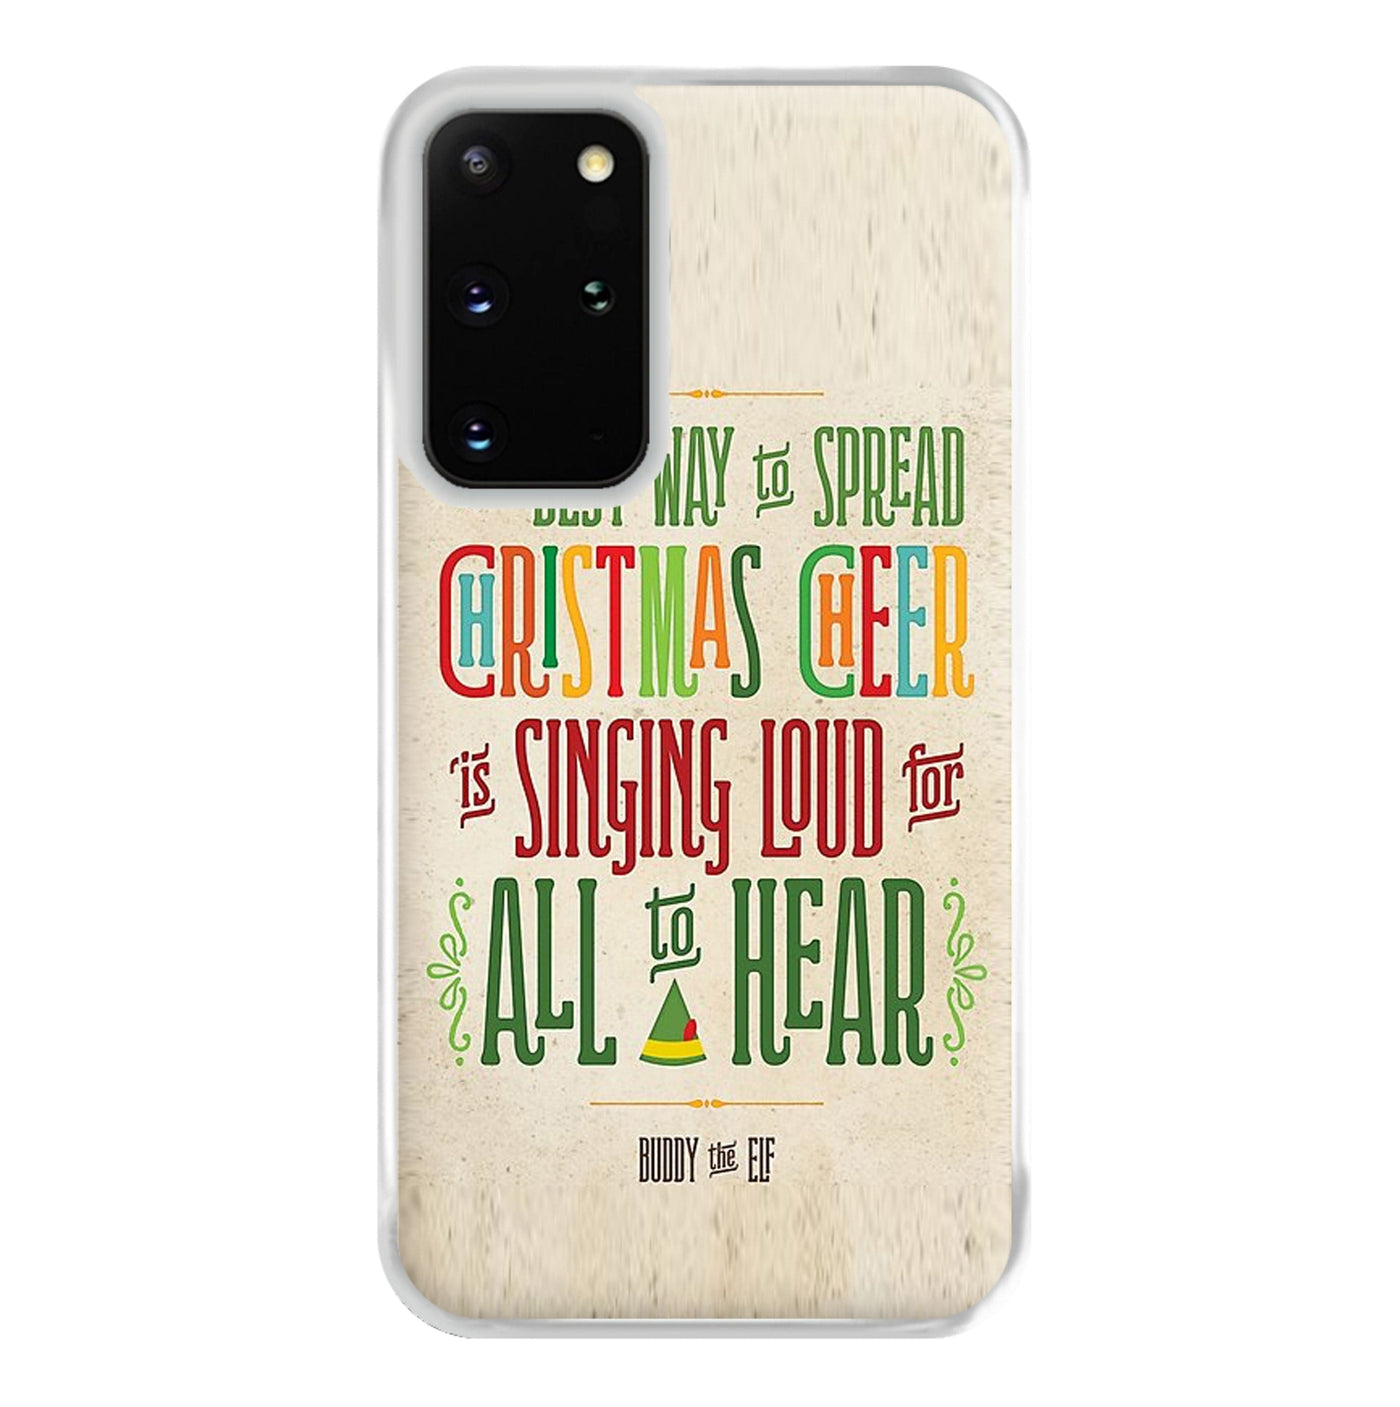 The Best Way To Spead Christmas Cheer - Buddy The Elf Phone Case